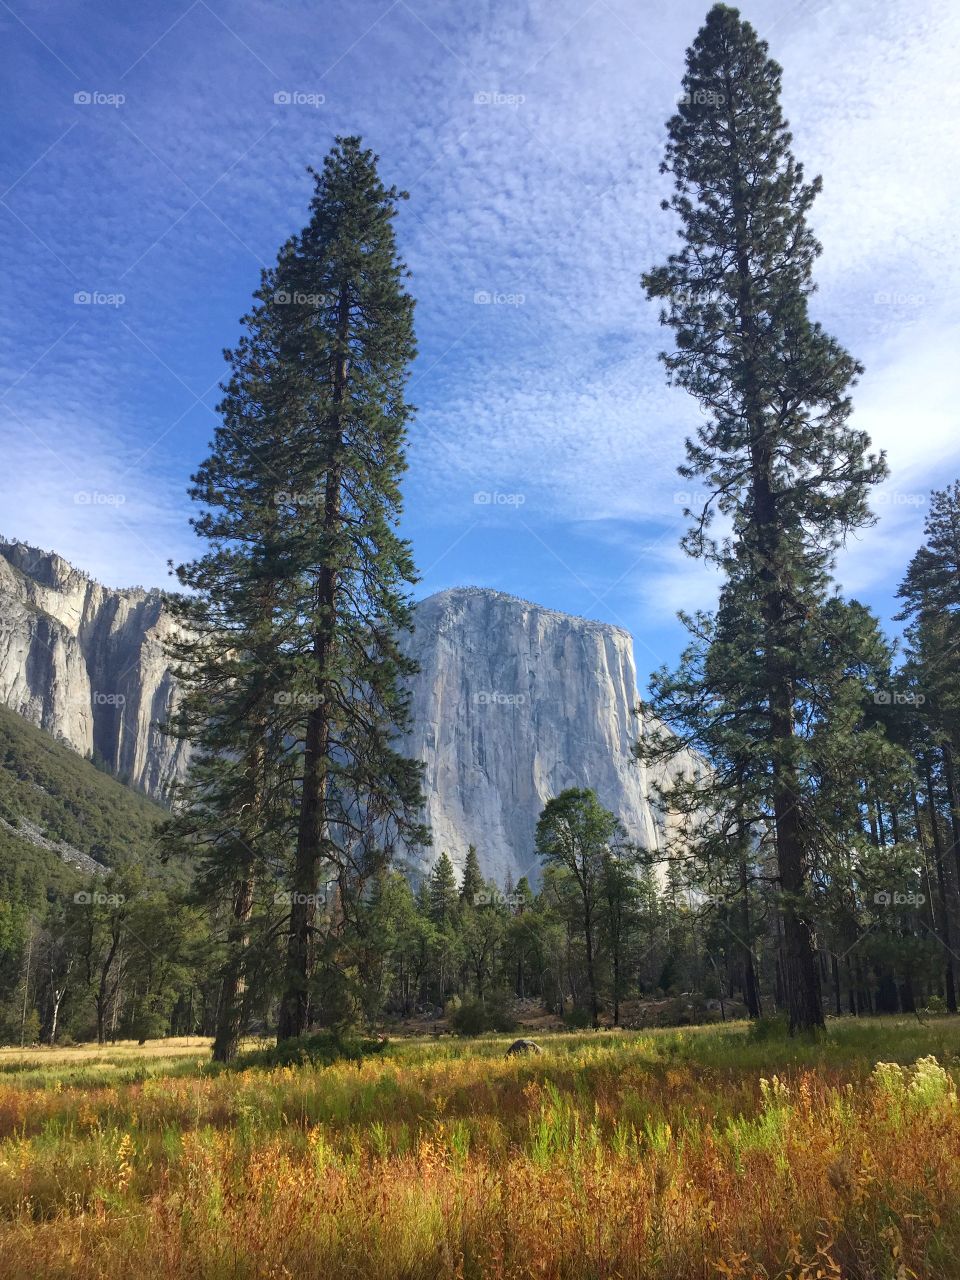 El Capitan in Yosemite National Park is one of the most majestic sights I have ever experienced in my life! The whole park is just breathtaking 